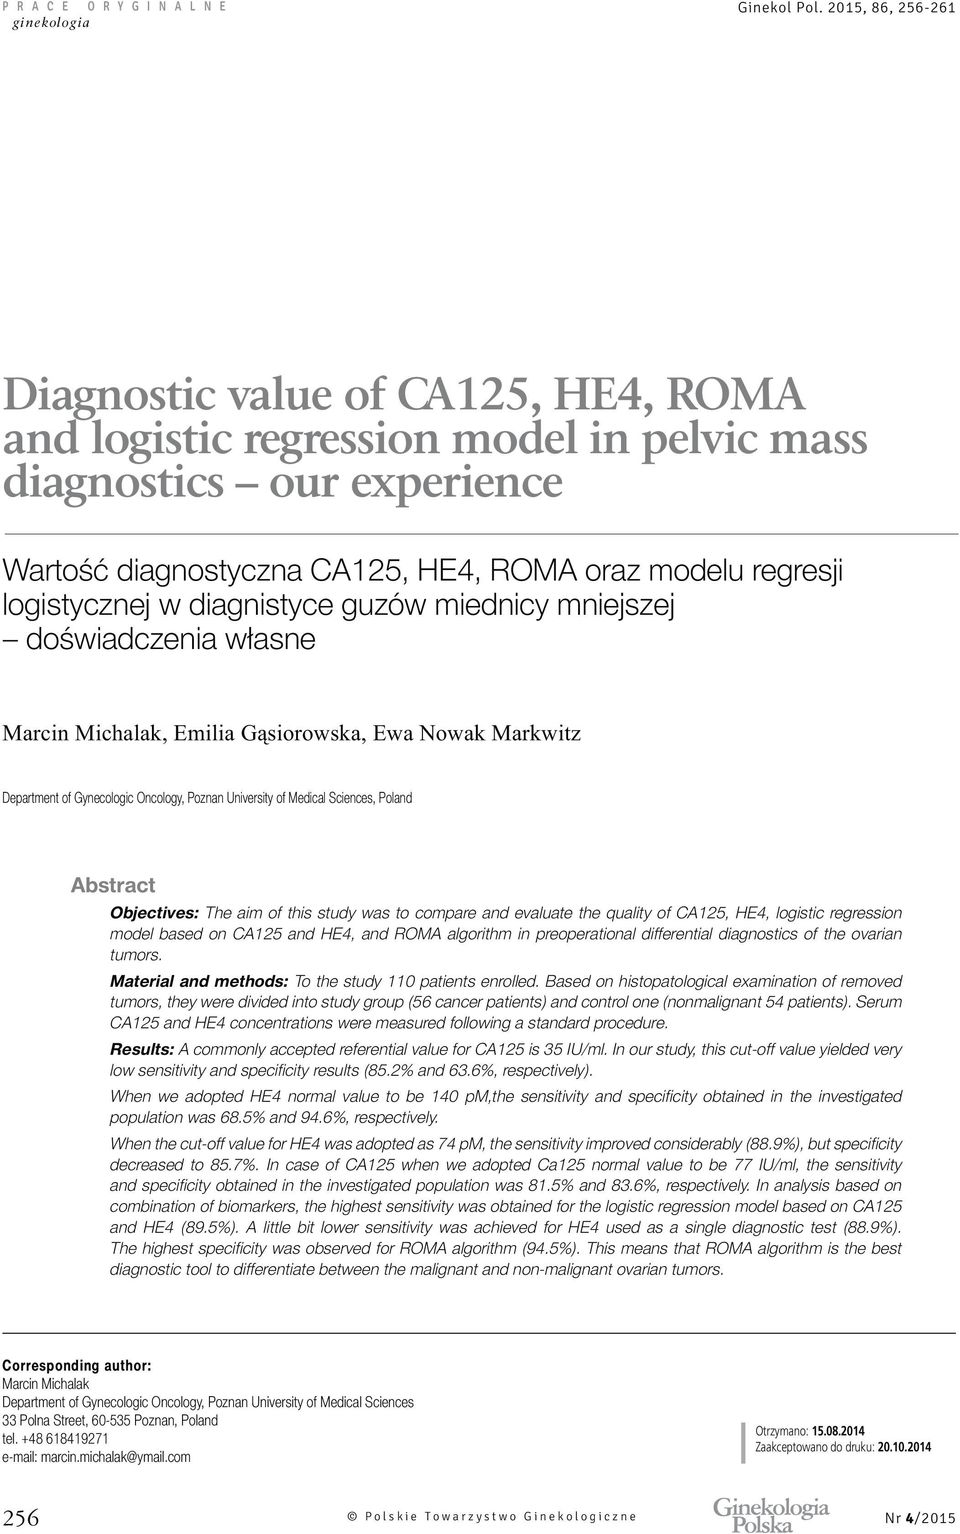 was to compare and evaluate the quality of CA125, HE4, logistic regression model based on CA125 and HE4, and ROMA algorithm in preoperational differential diagnostics of the ovarian tumors.